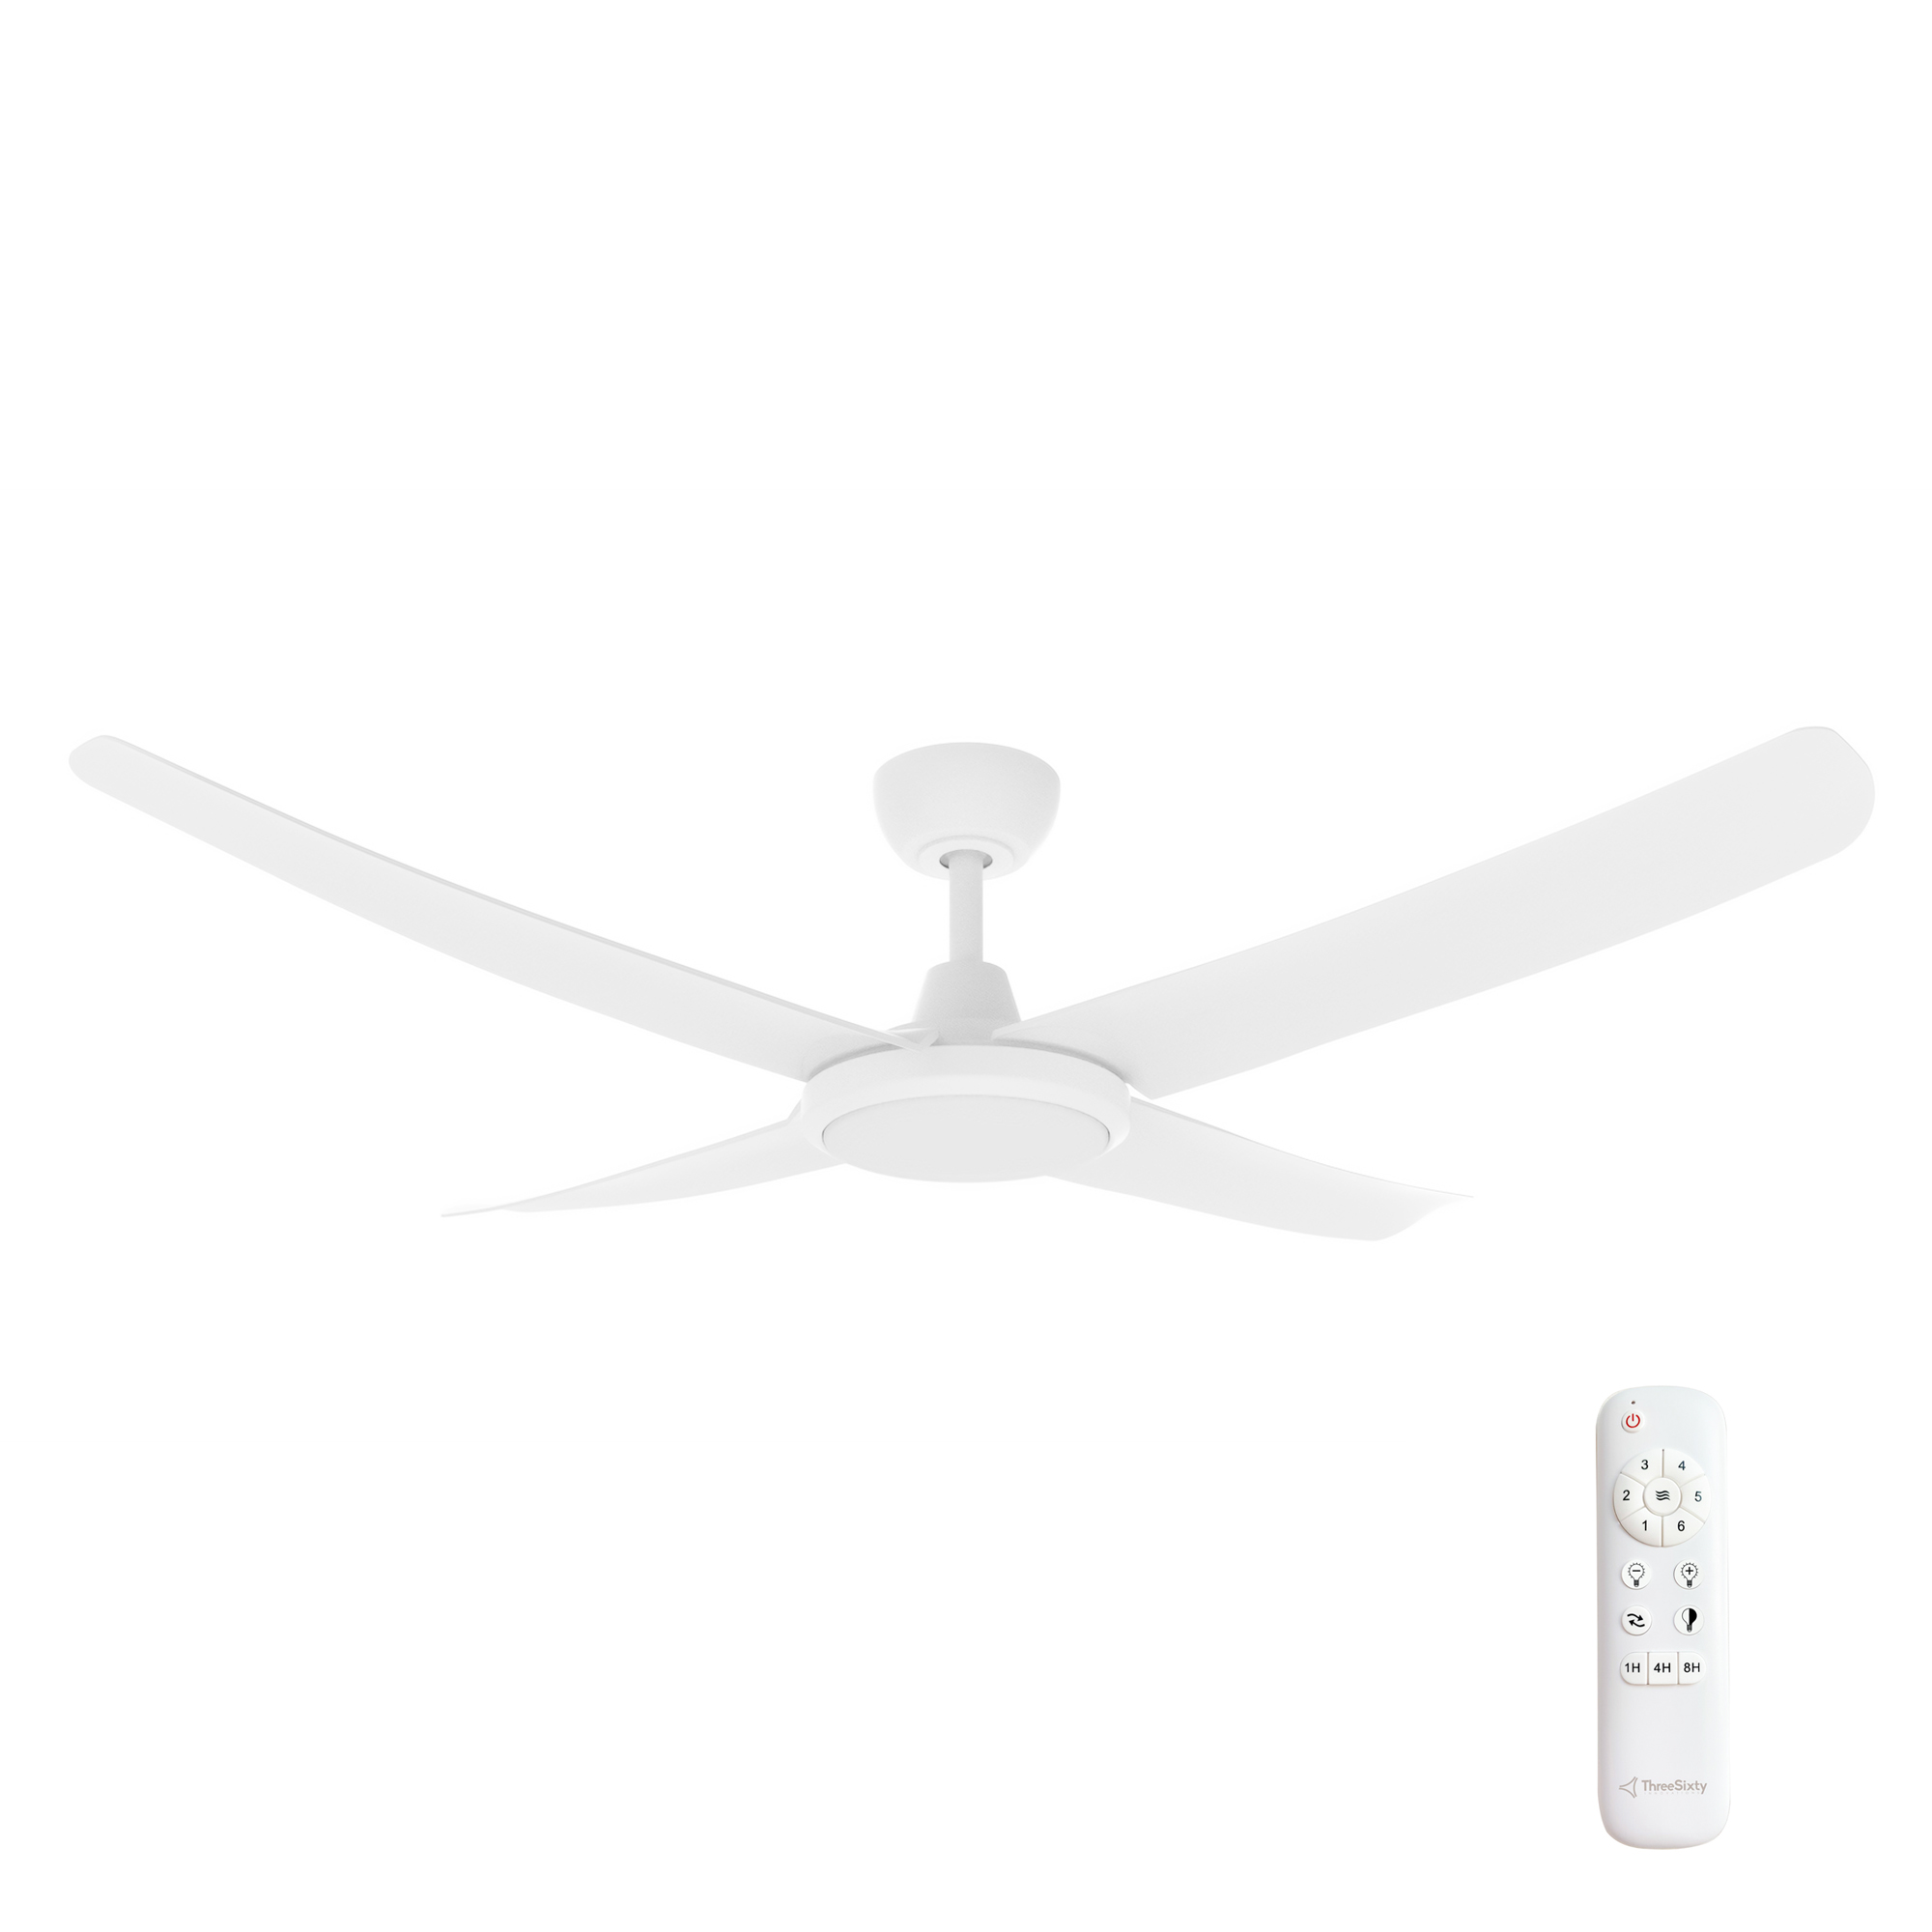 52" FlatJET DC Ceiling Fan in Matte White with 24W CCT LED Light (4 Blade)